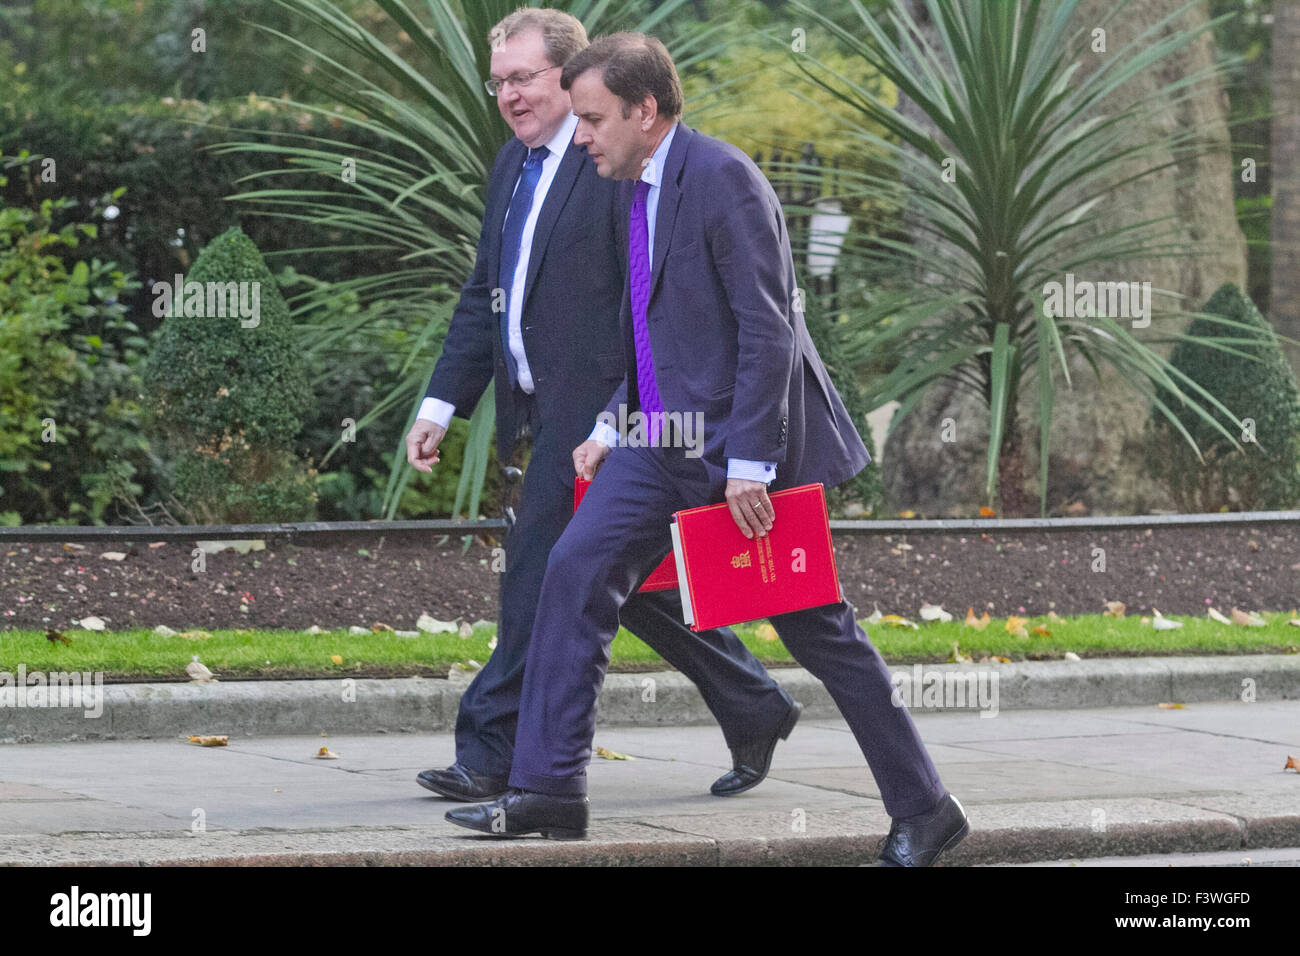 Westminster London,UK. 13th October 2015. David Mundell MP, Secretary for Scotland (Left) Portfolio arrives with Gregs Hands (Right) Chief Secretary to the Treasury at Downing for the weekly cabinet meeting Credit:  amer ghazzal/Alamy Live News Stock Photo